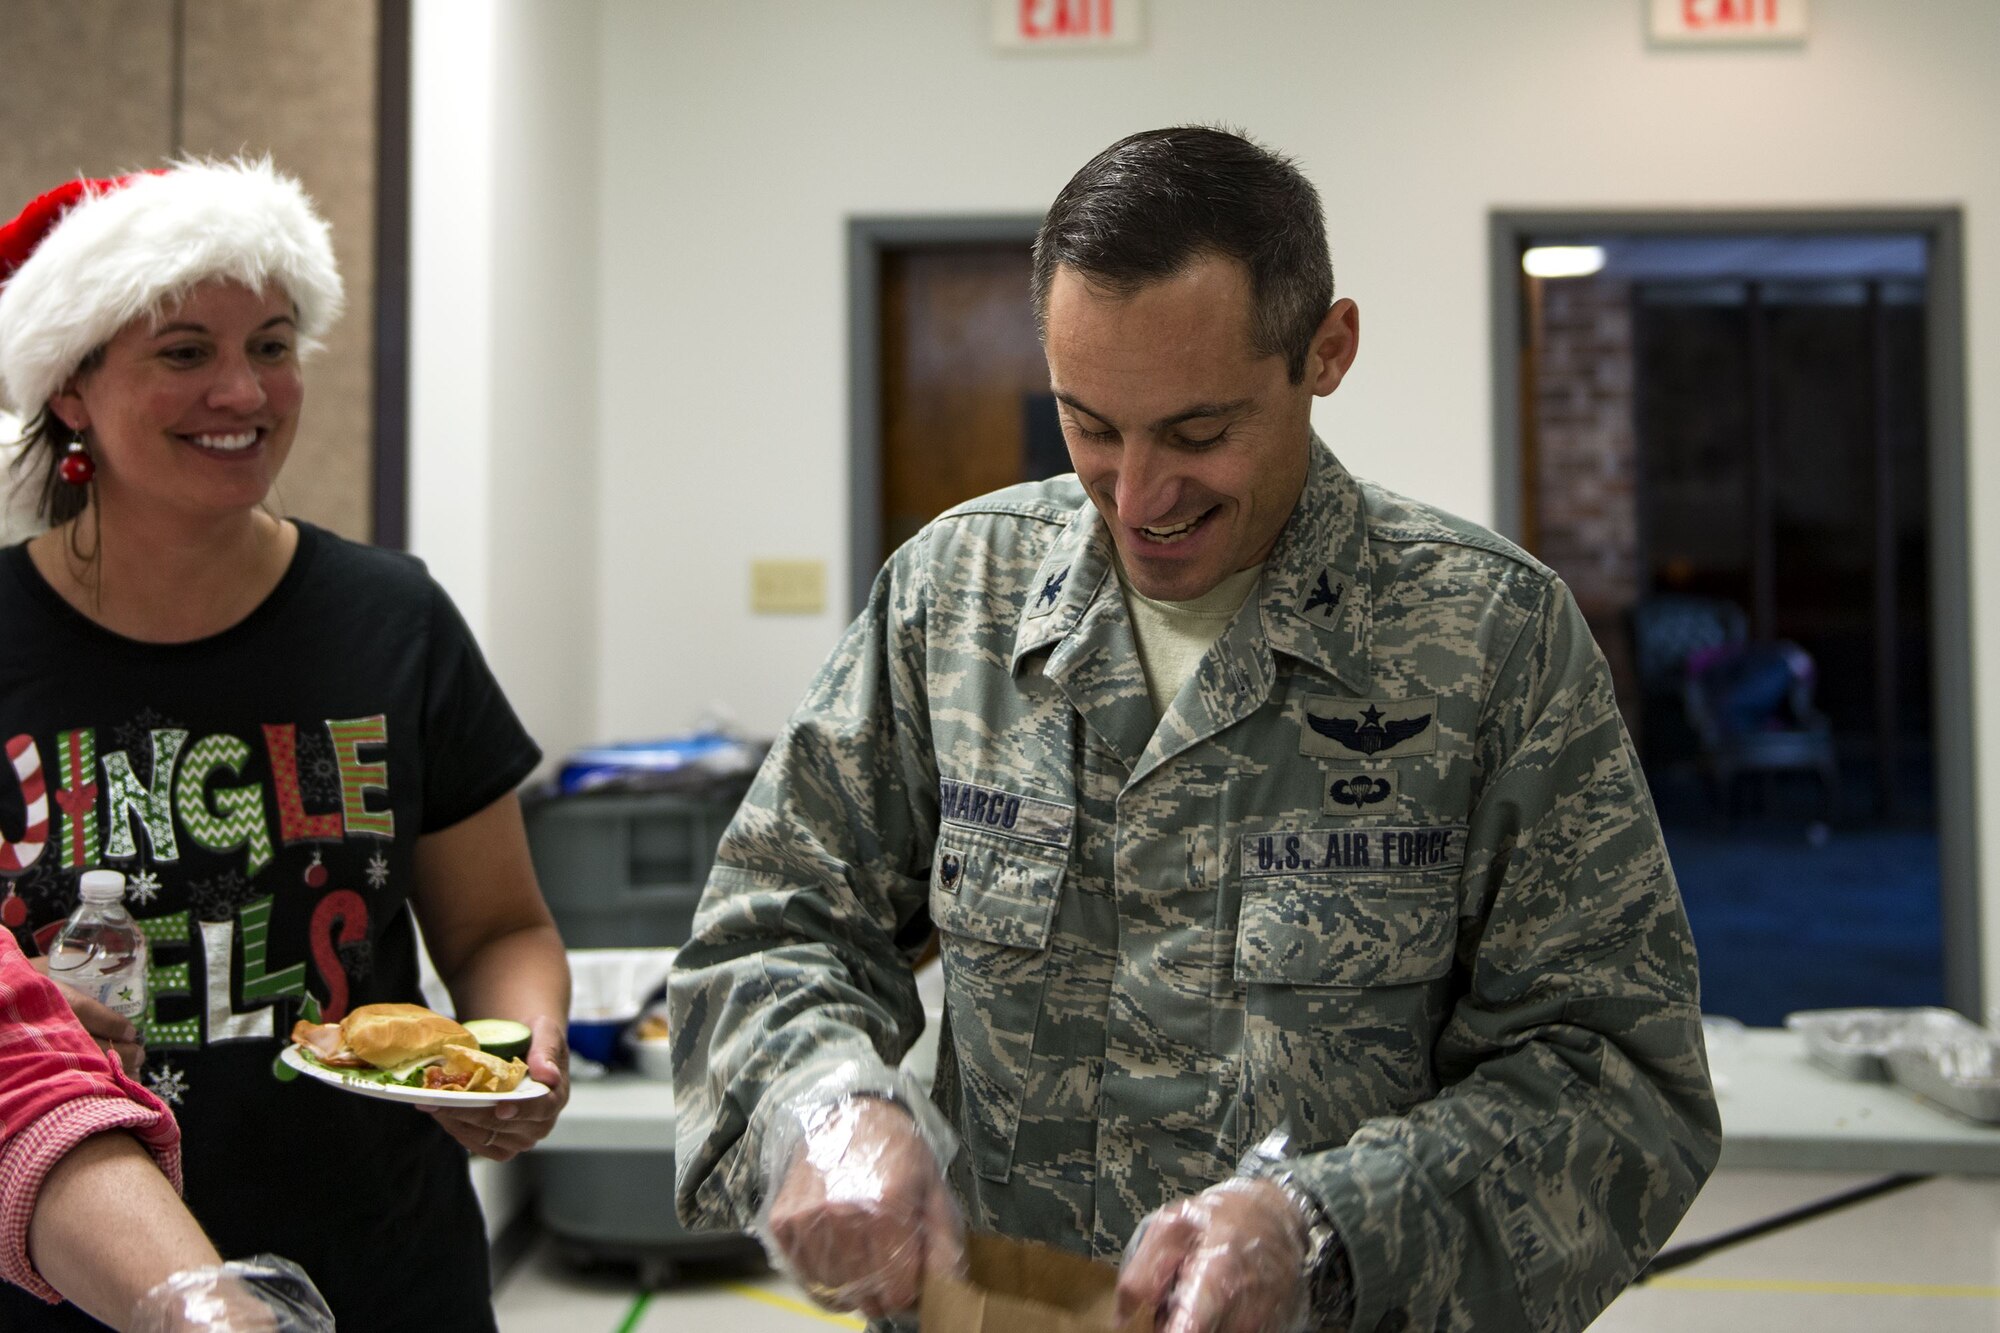 Col. Justin Demarco, 23d Wing vice commander, fills bags with cookies during the Annual Moody Airmen Cookie Drive, Dec. 4, 2017, at Moody Air Force Base, Ga. Local organizations, Airmen and spouses donated more than 8,000 cookies to approximately 700 dorm residents to show appreciation for the Airmen during the holidays. (U.S. Air Force photo by Airman 1st Class Erick Requadt)